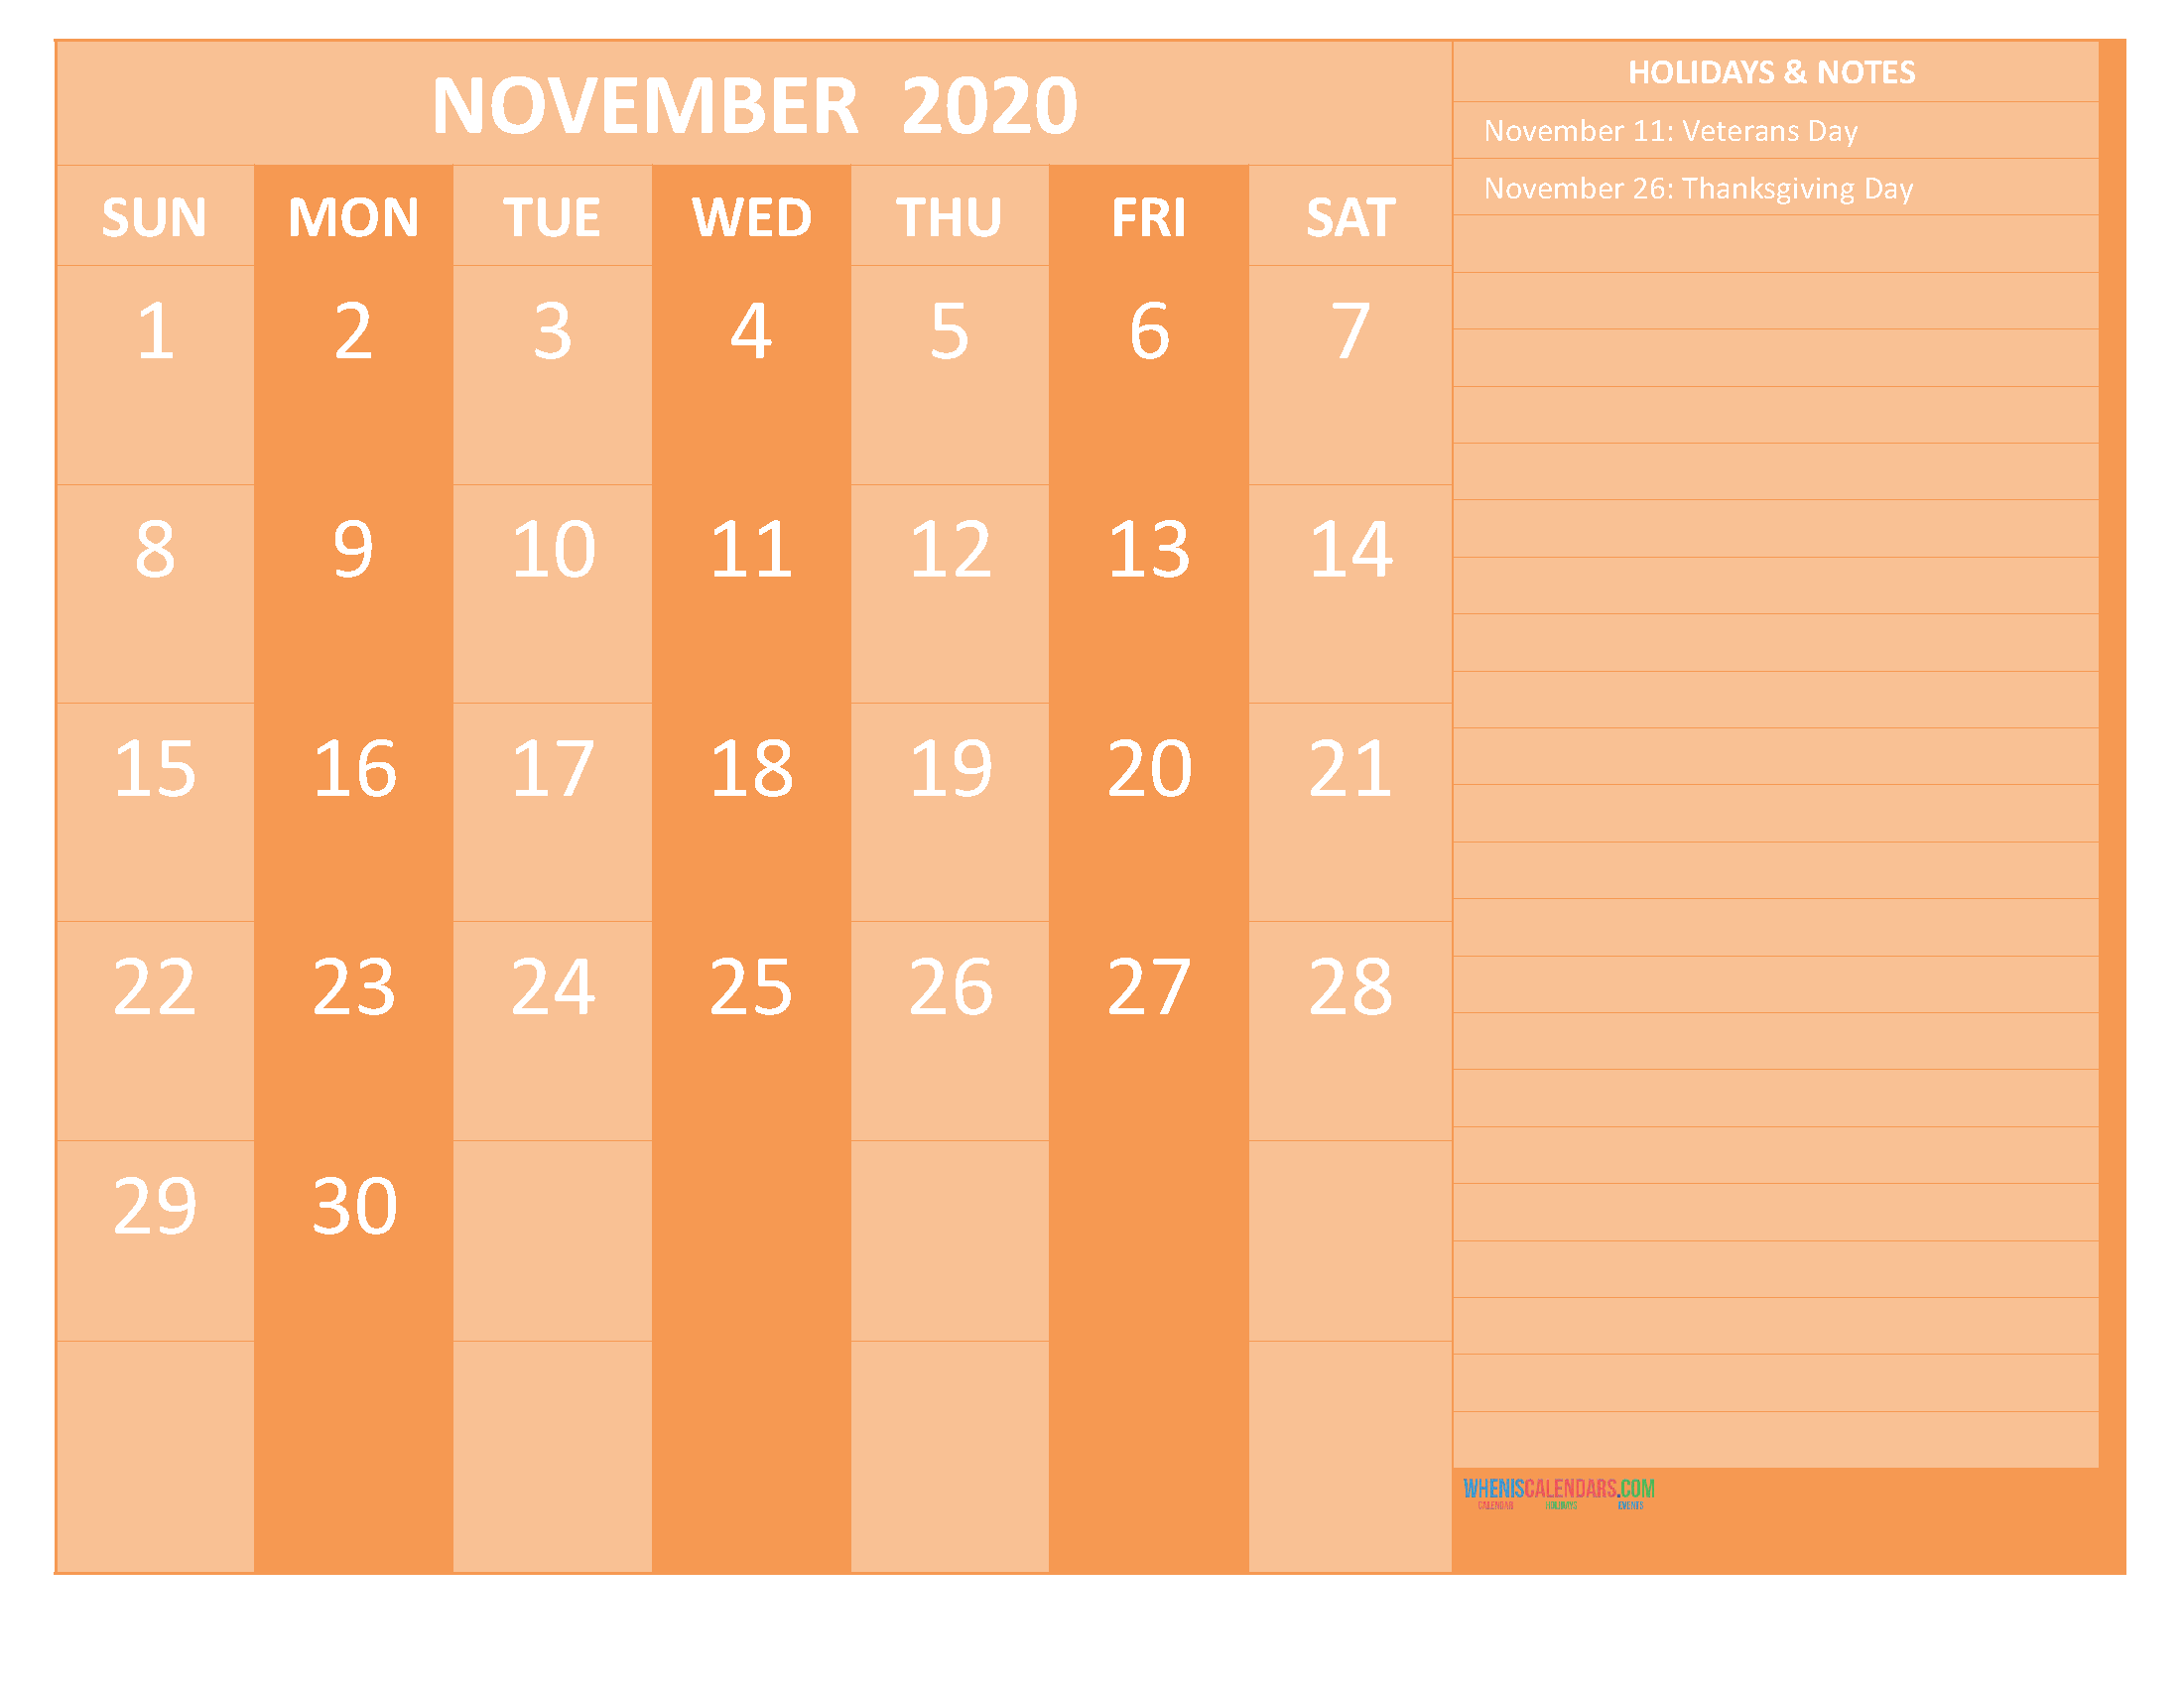 November 2020 Calendar with Holidays Free Printable by Word